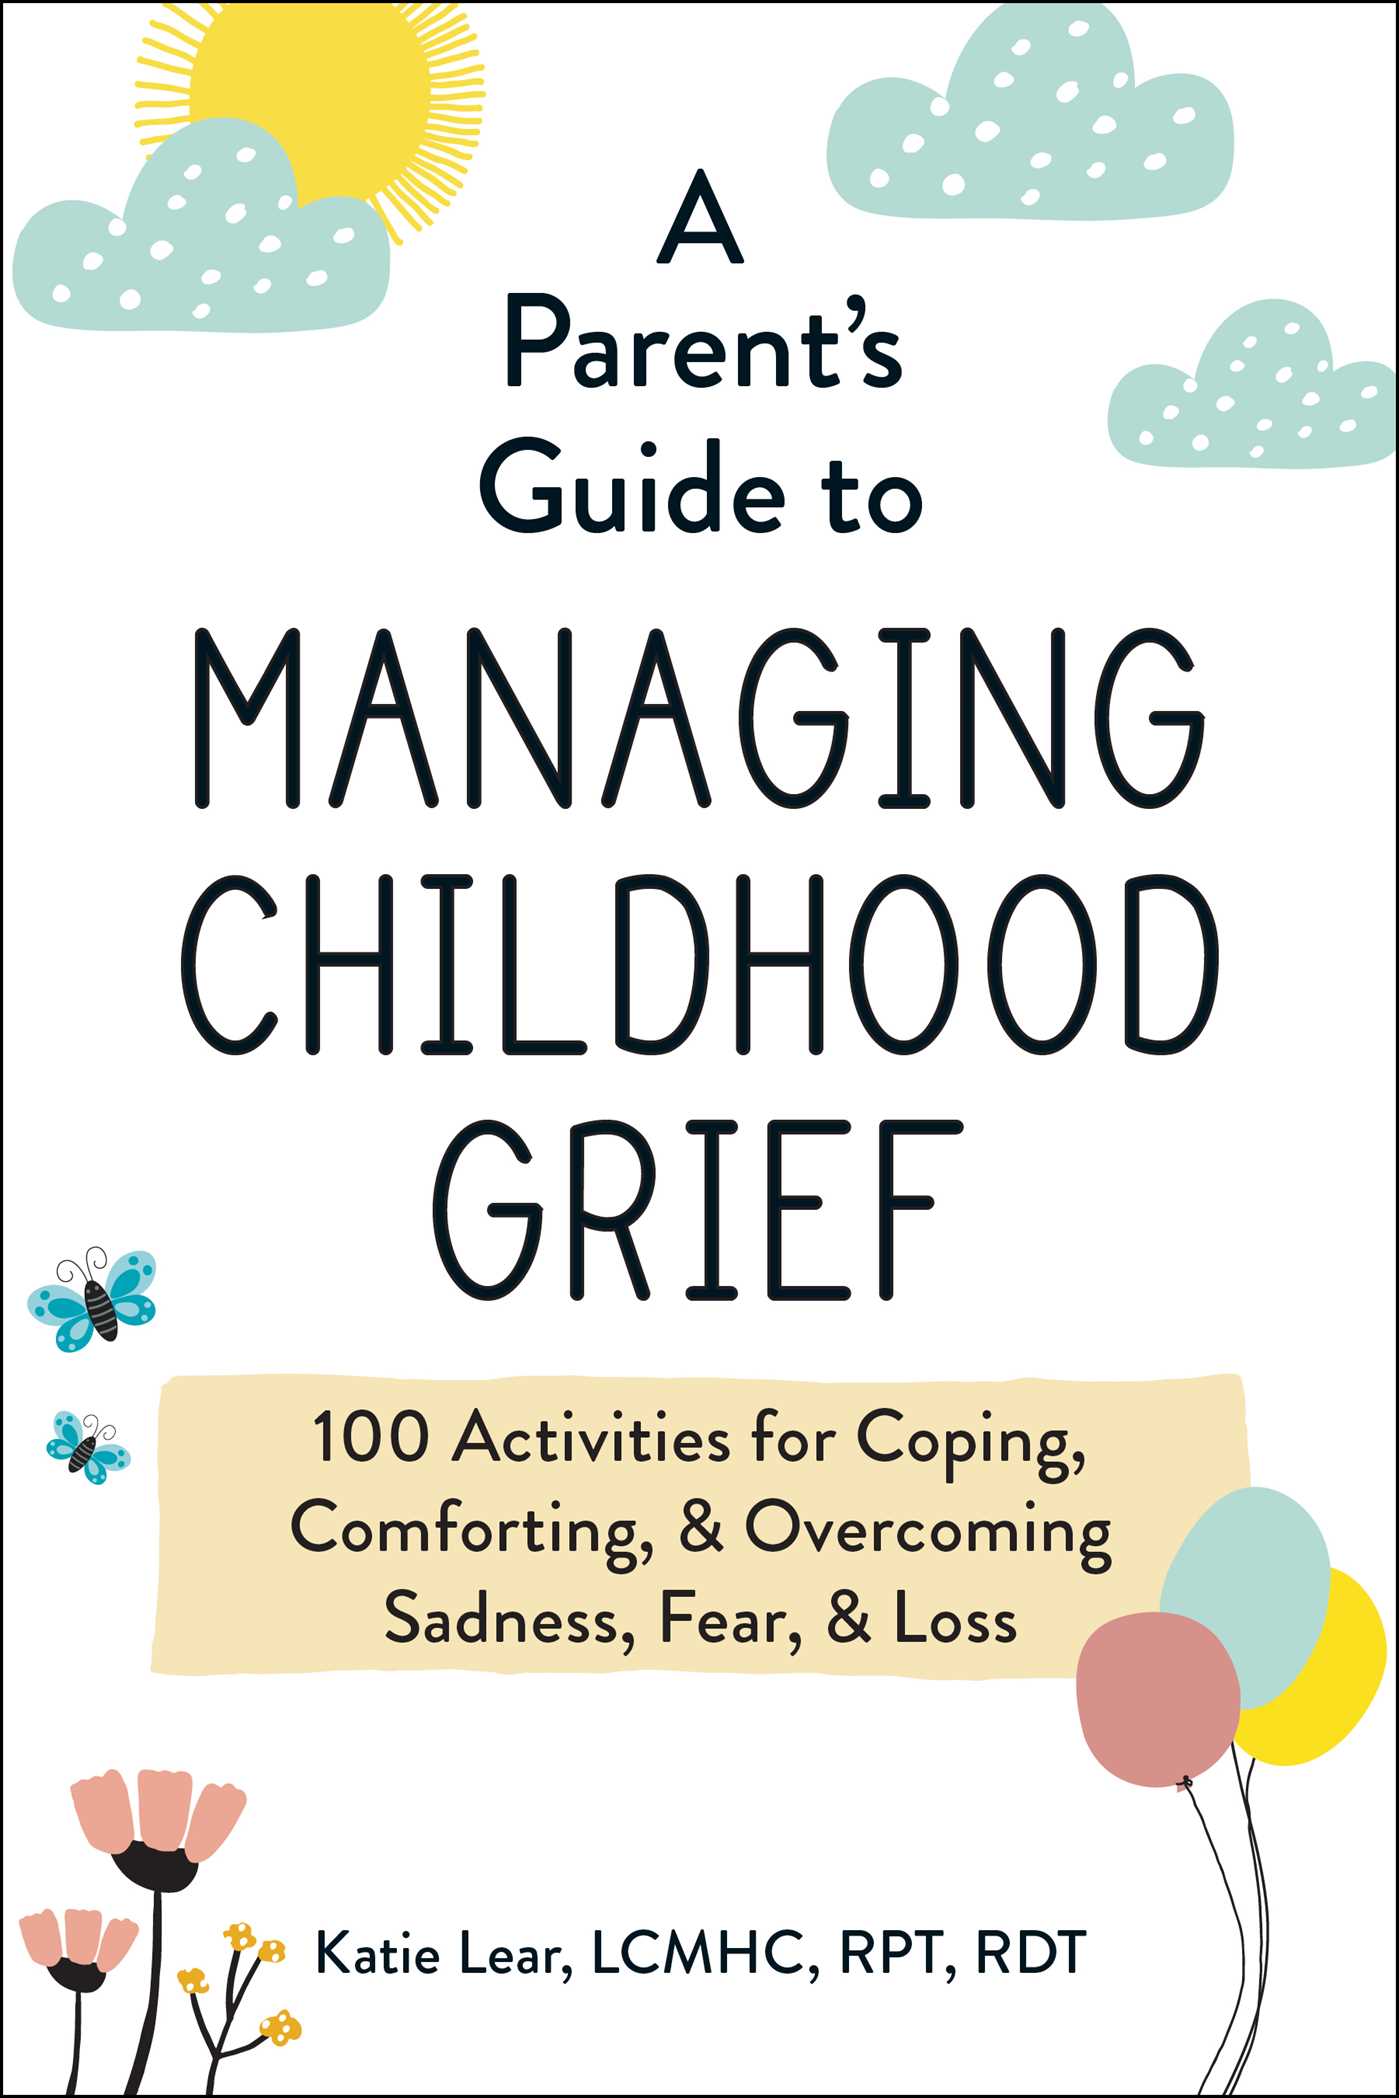 A Parent's Guide to Managing Childhood Grief : 100 Activities for Coping, Comforting, & Overcoming Sadness, Fear, & Loss | Parenting